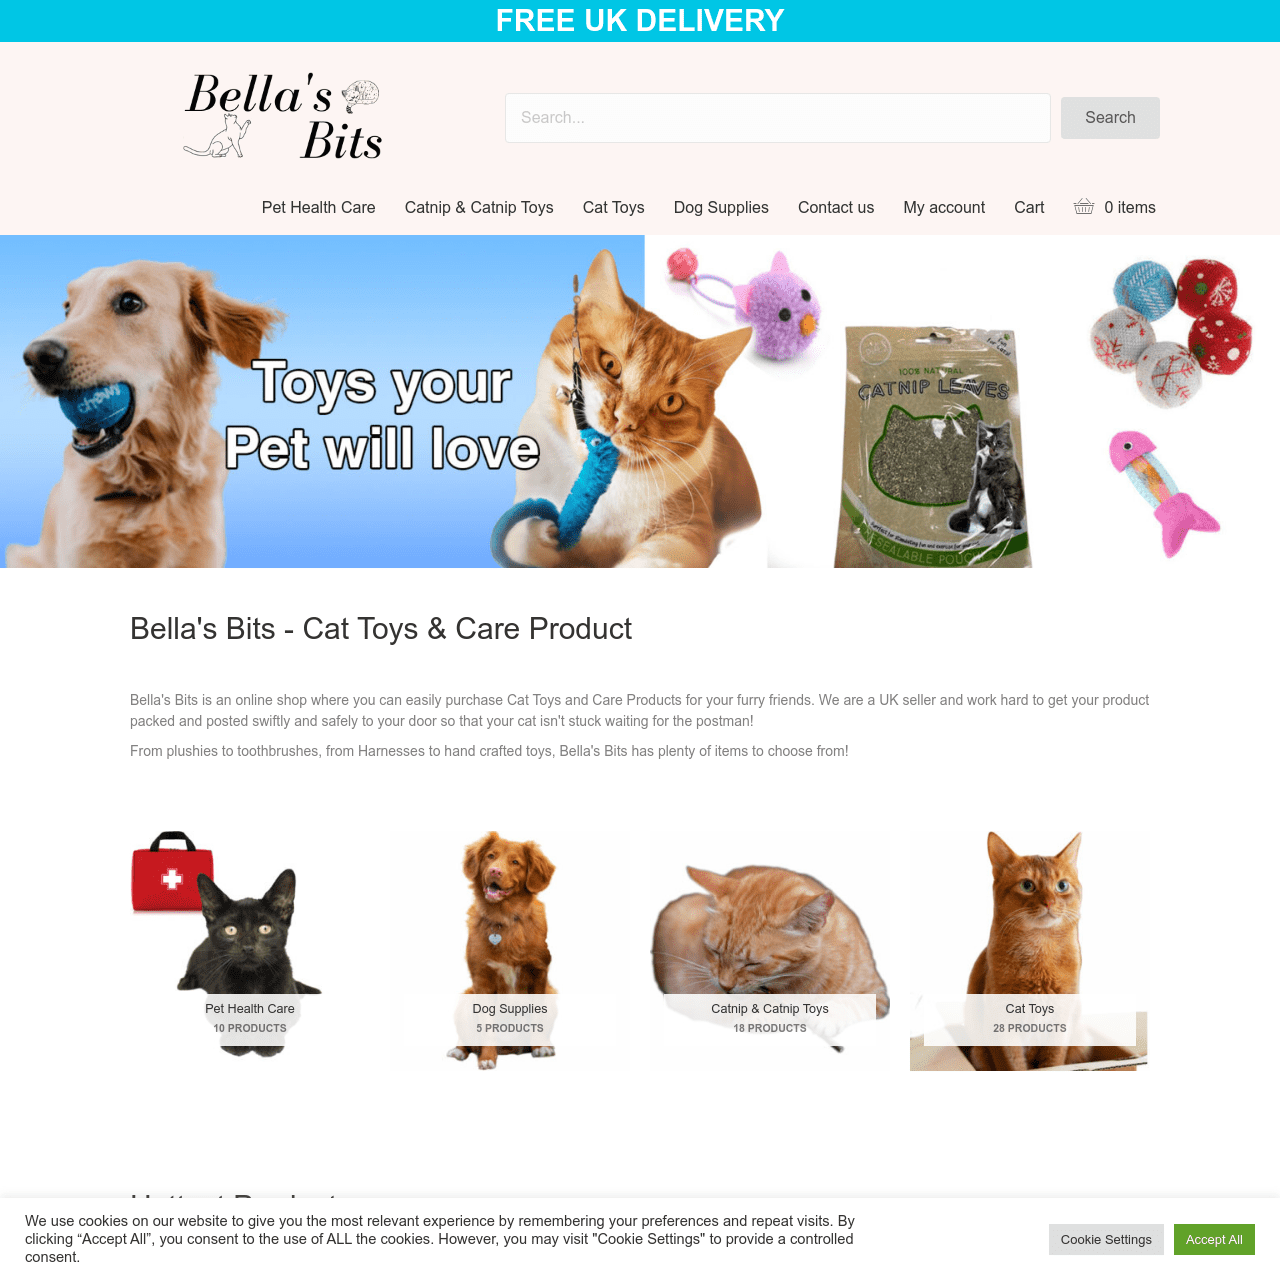 Bellas Bits – Cat Toys & Care Products